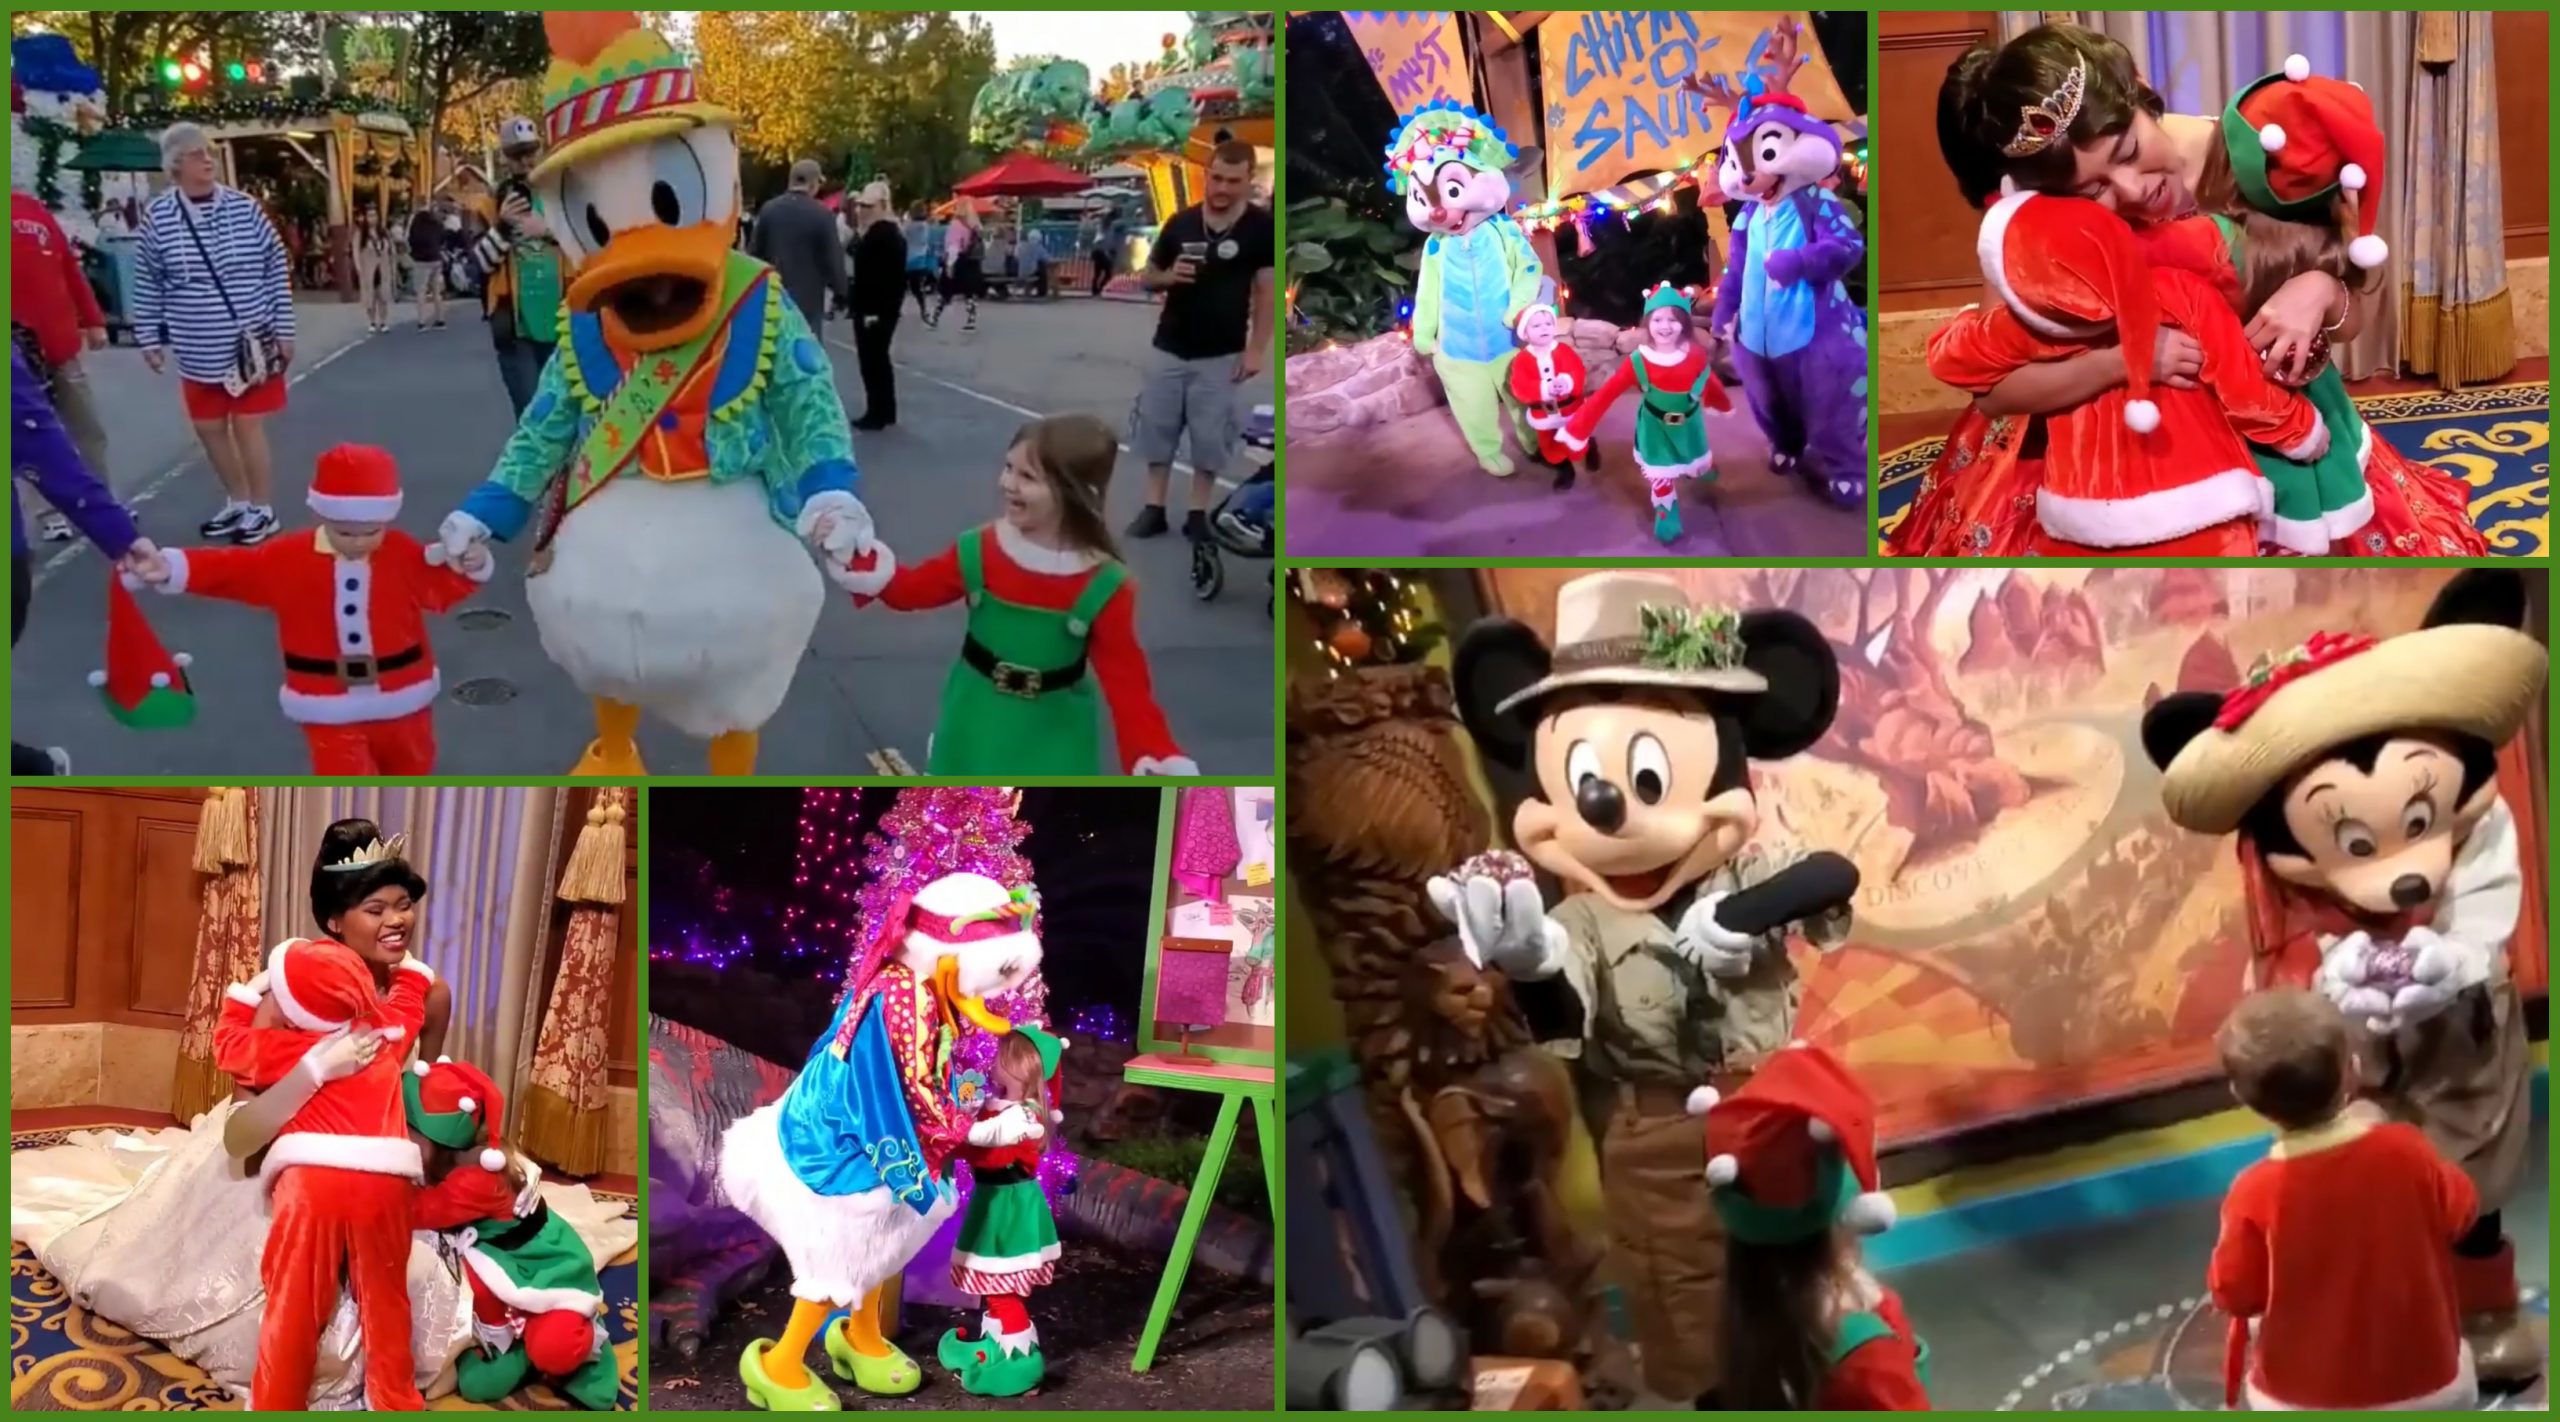 Festive Guests Give Special Gifts to Disney Characters During Meet and Greets at Walt Disney World